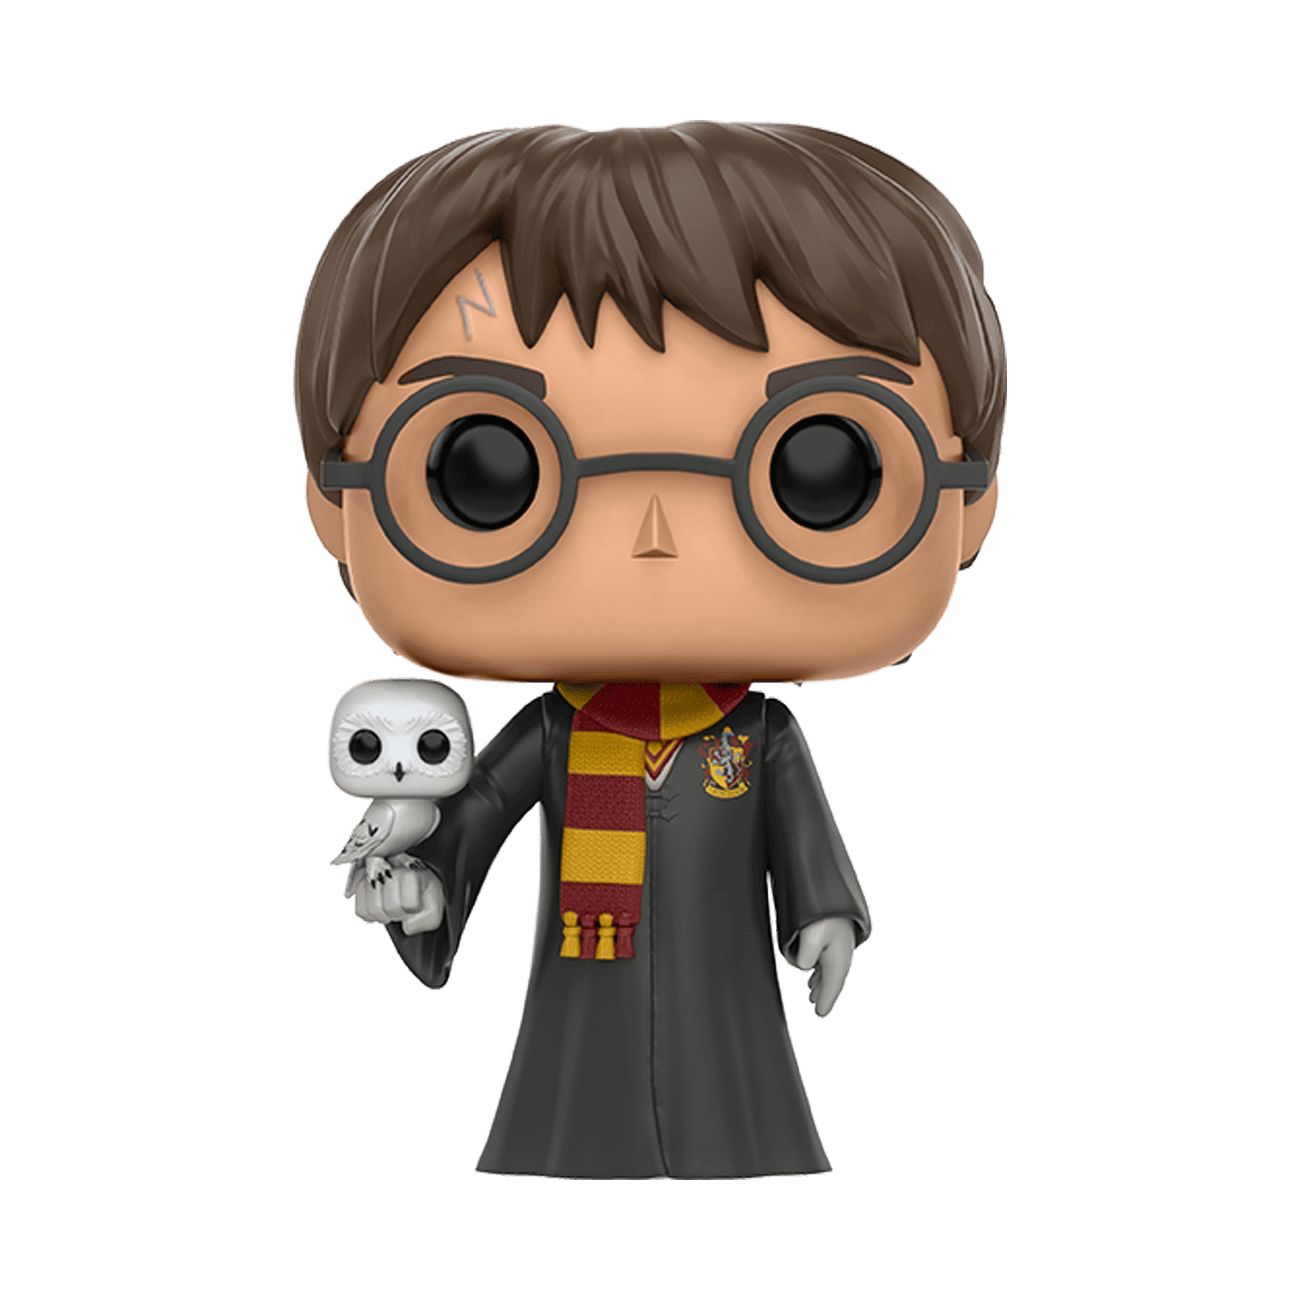 Buy Pop! Harry Potter with Hedwig at Funko.